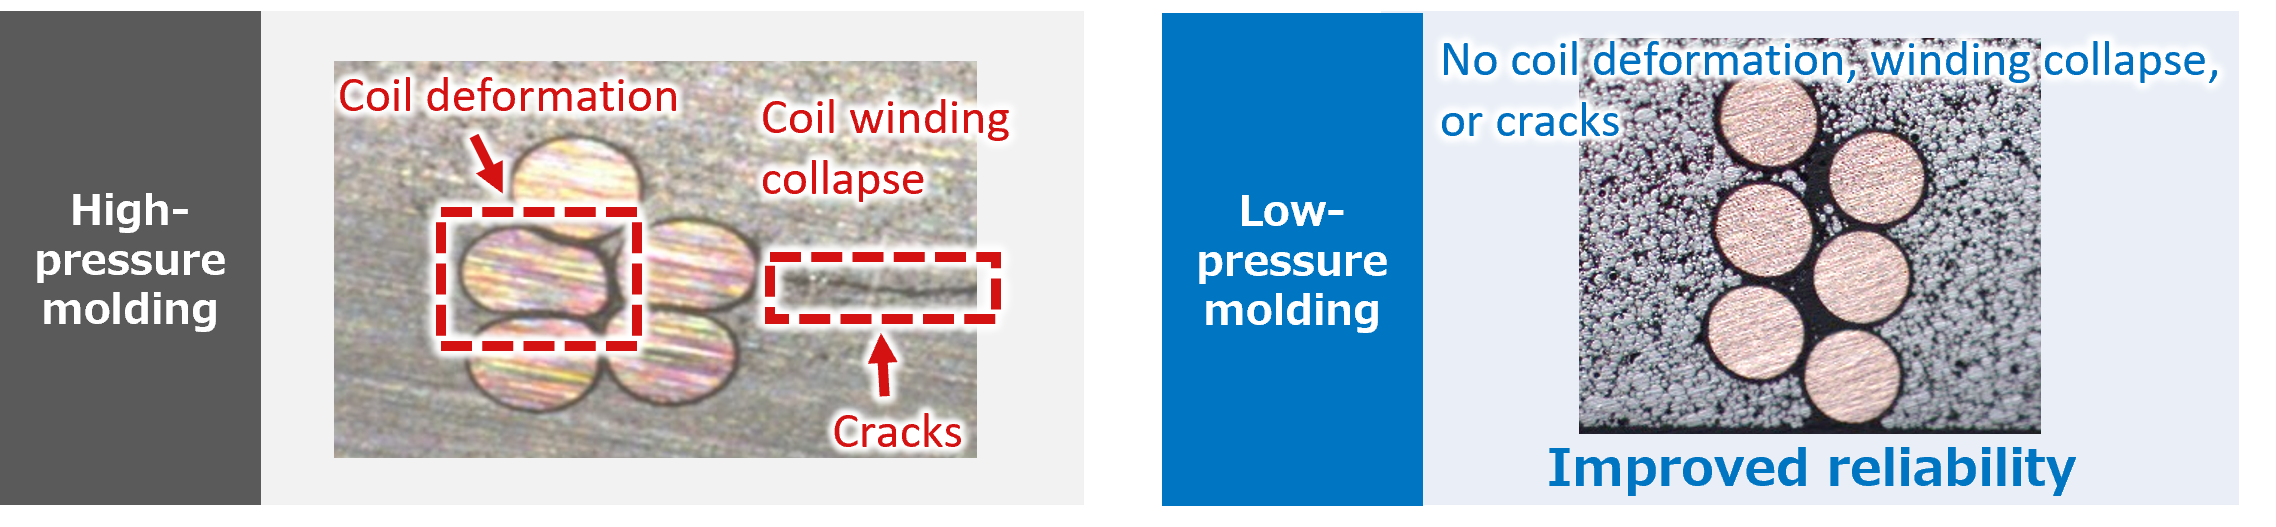 Cross sections of inductors encapsulated by high-pressure molding (Examples of deformation, etc.) and low-pressure molding